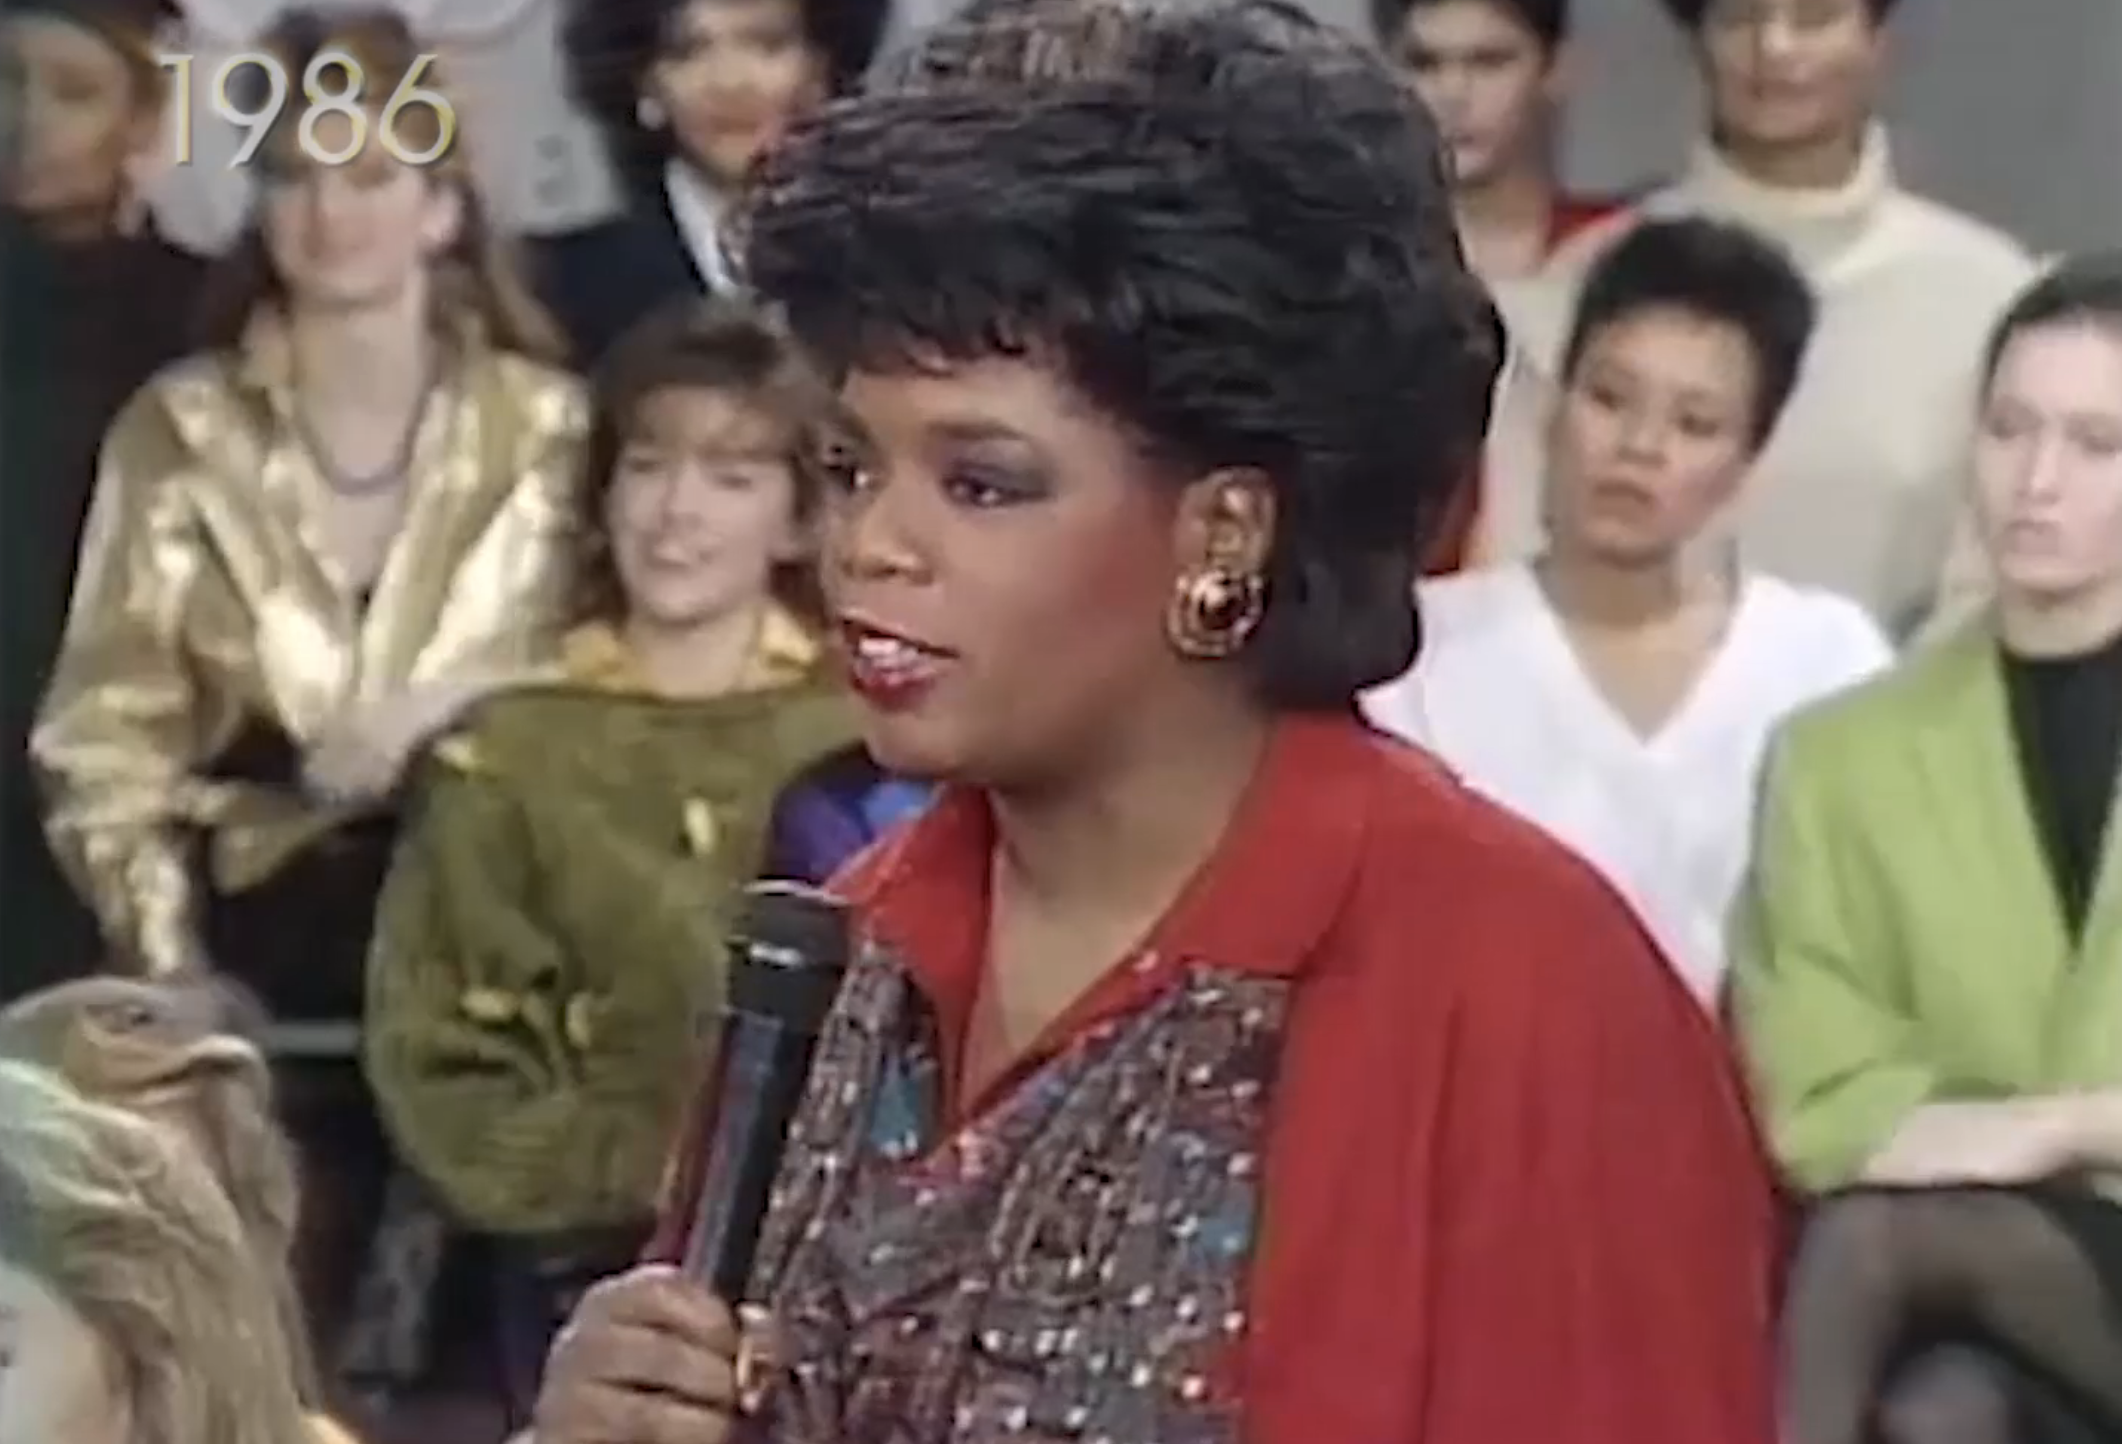 A closeup of Oprah holding a microphone with the audience behind her